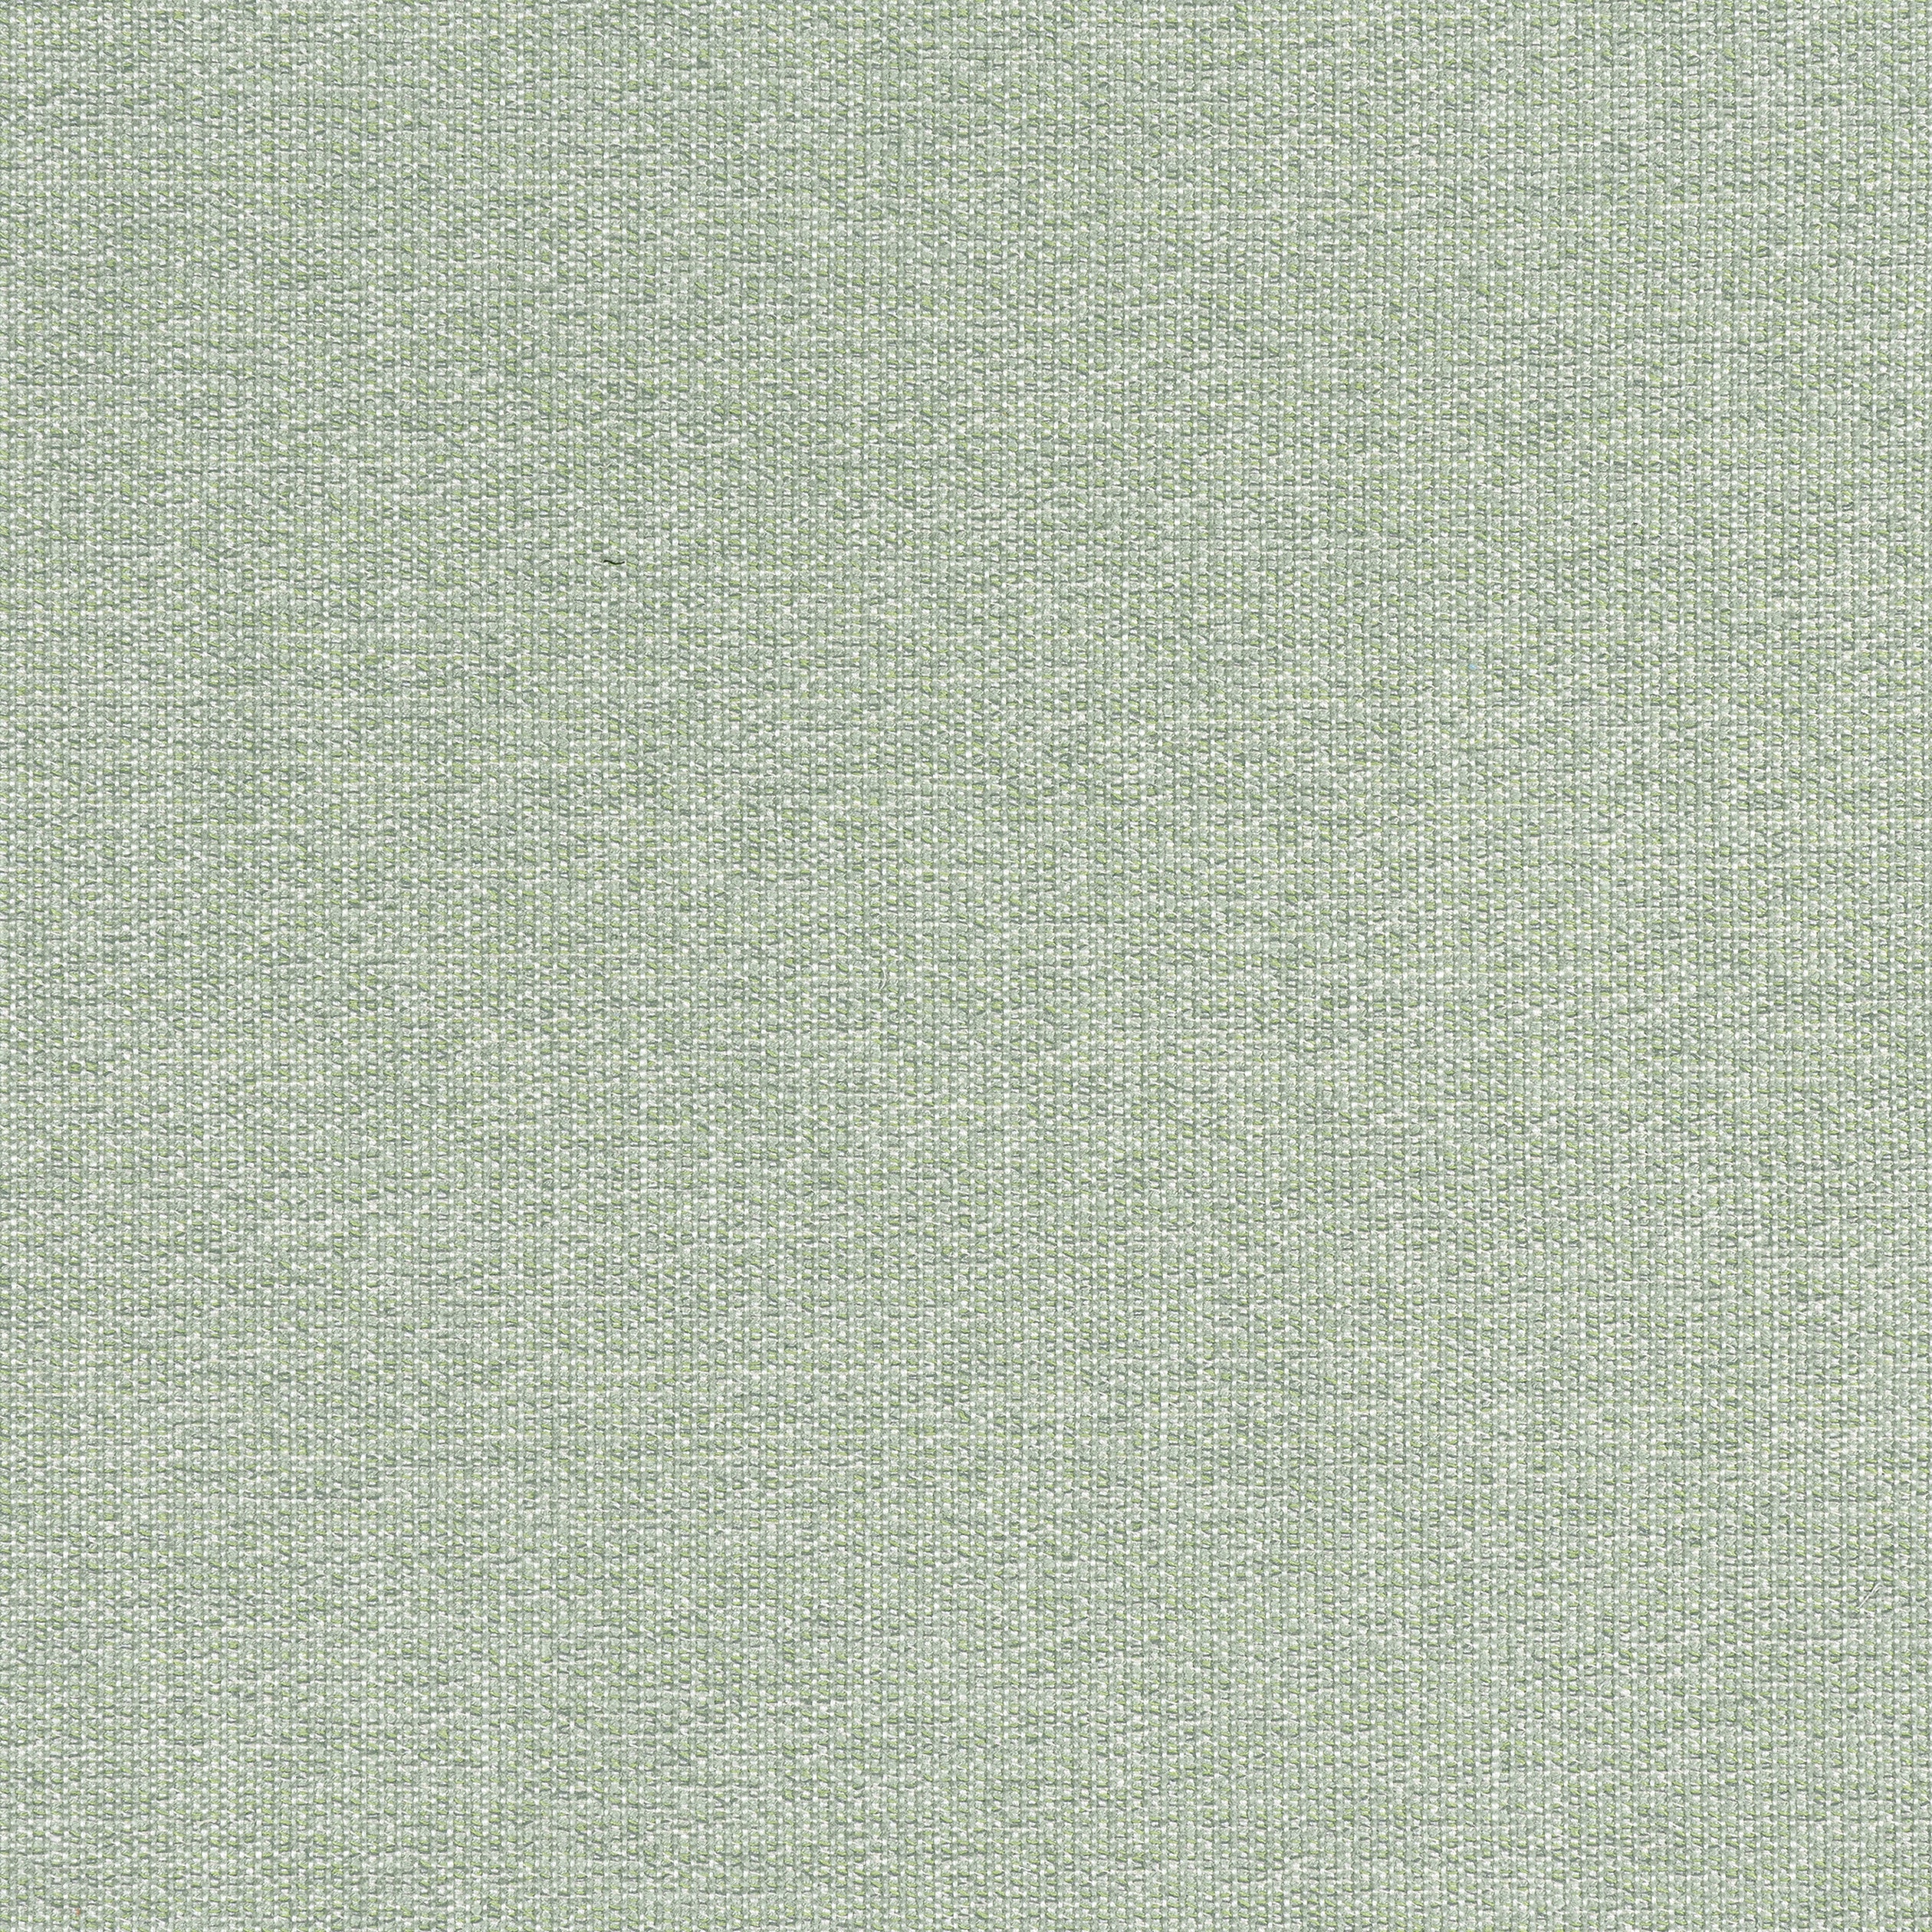 Sacchi fabric in aloe color - pattern number W8759 - by Thibaut in the Haven Textures collection